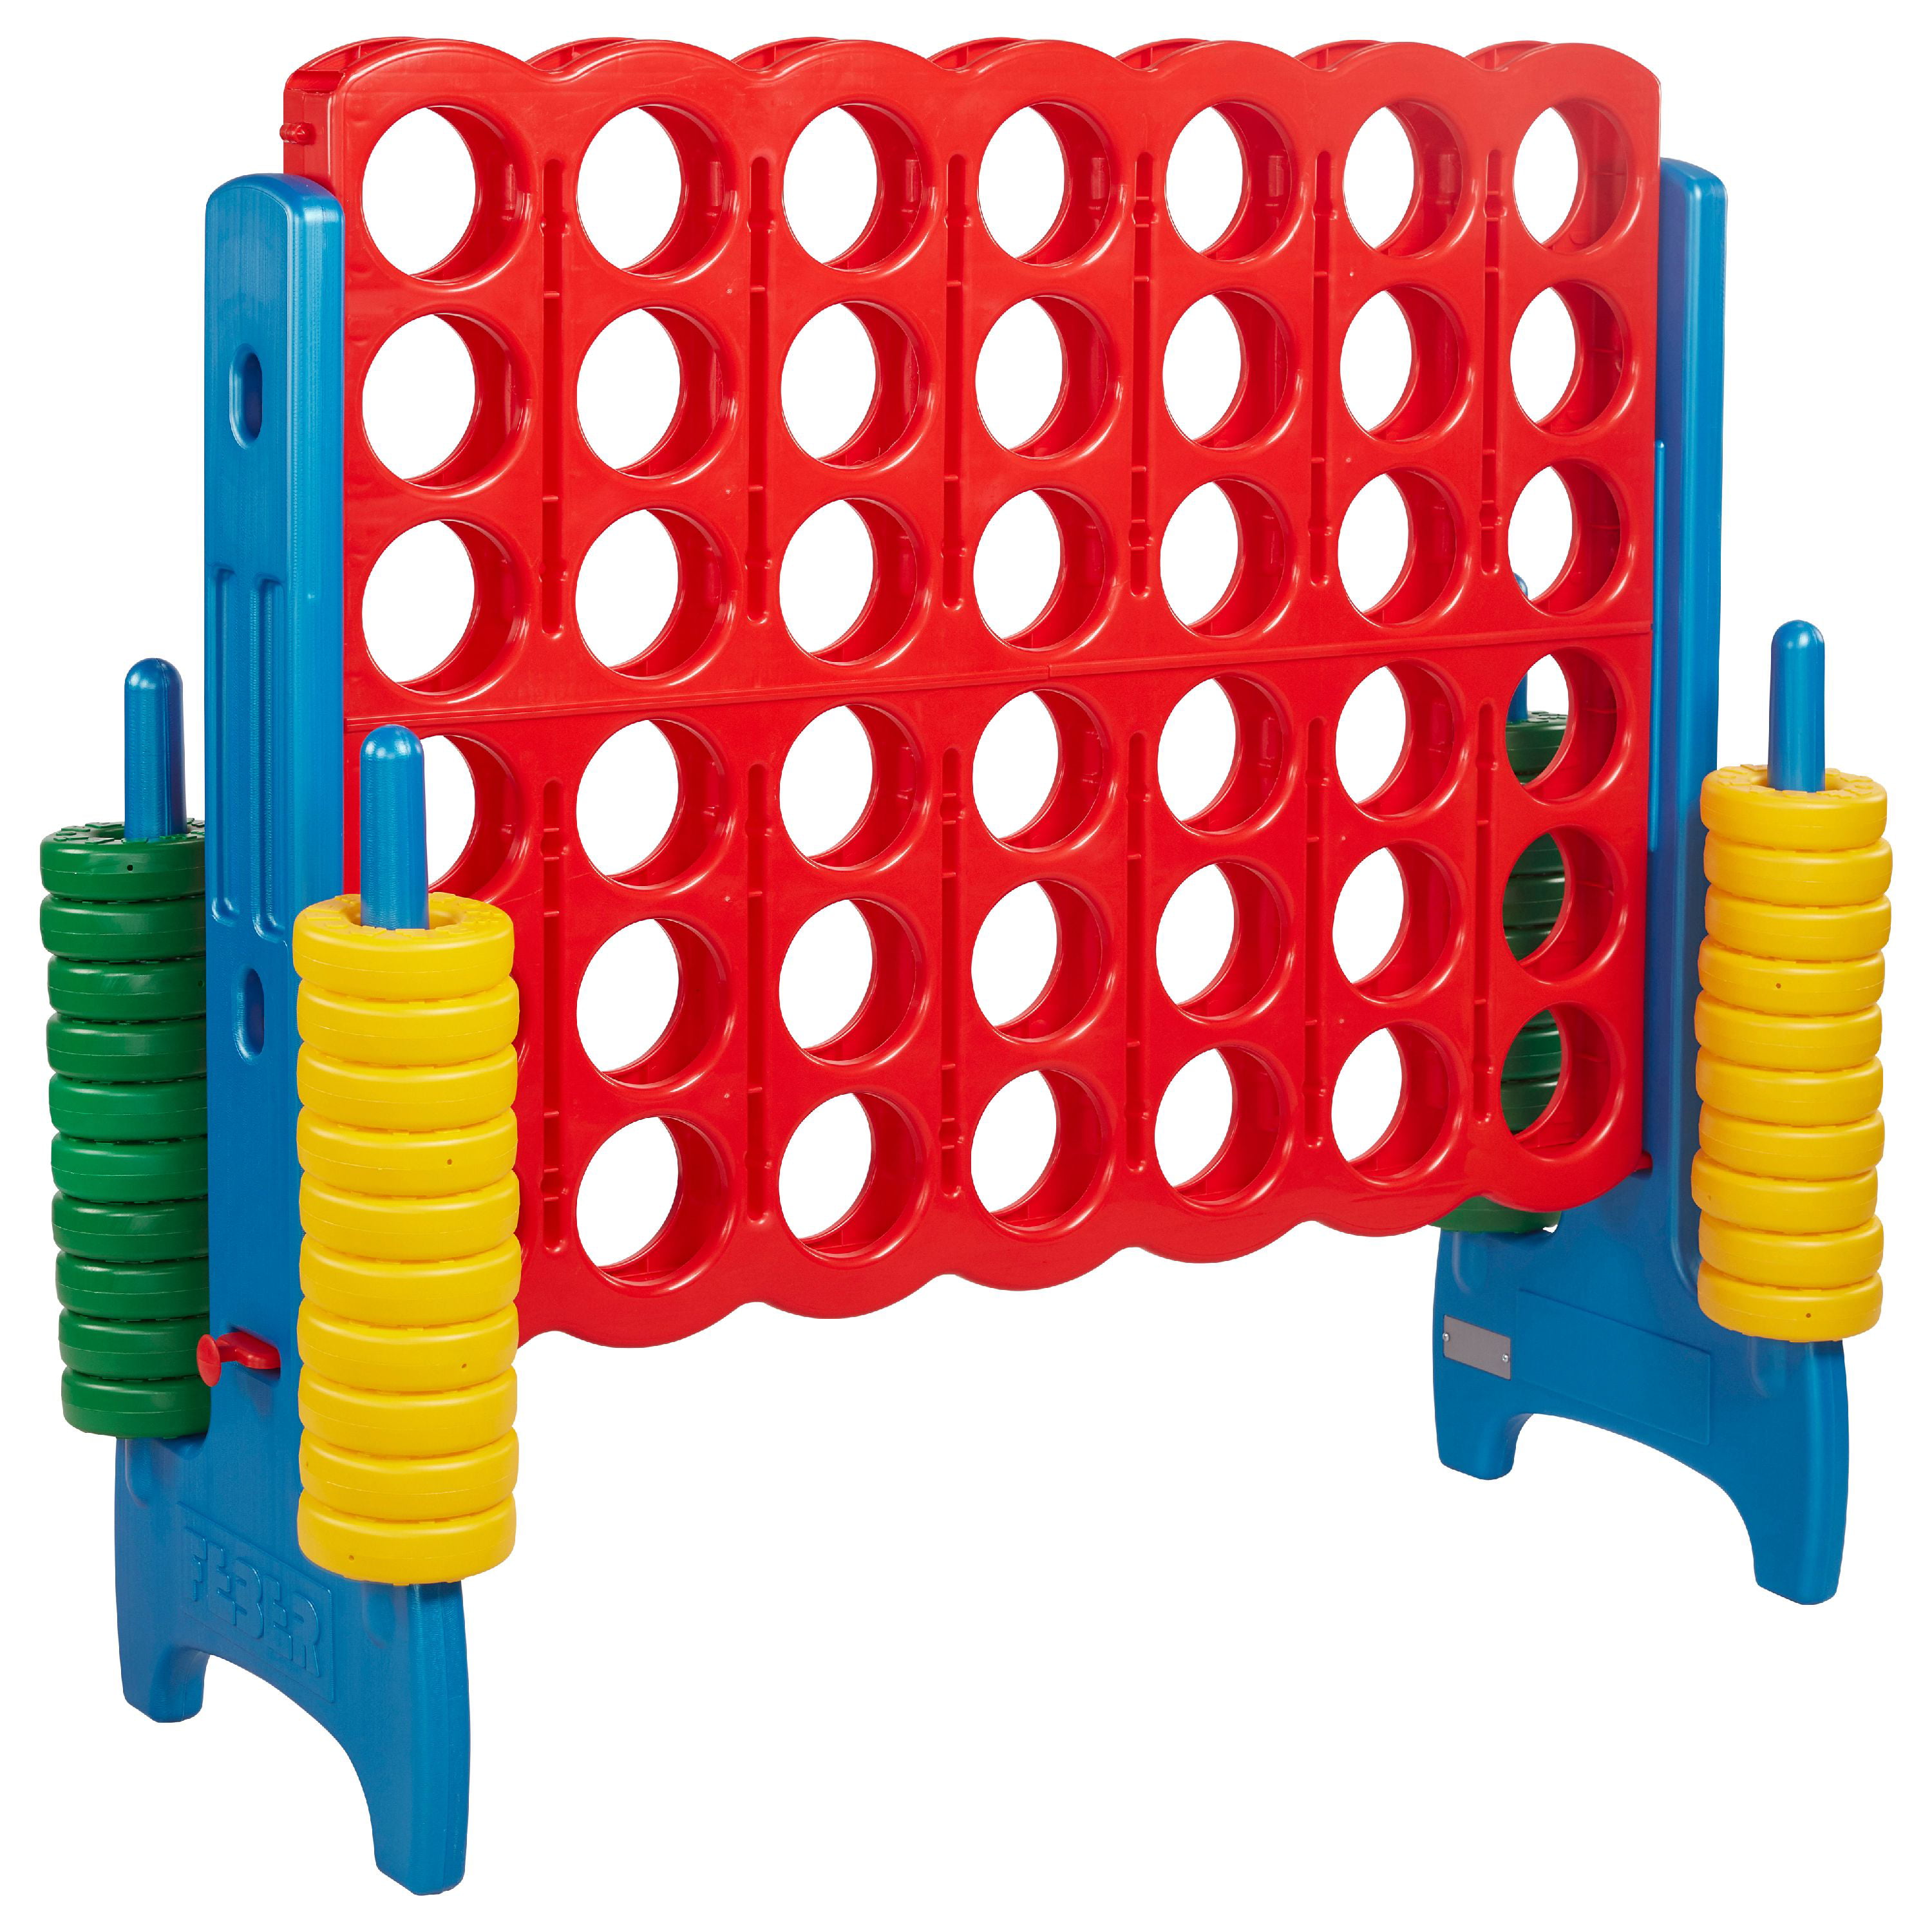 4 Feet Tall Giant Sized Fun for Kids and Adults Jumbo 4-To-Score Game Set 